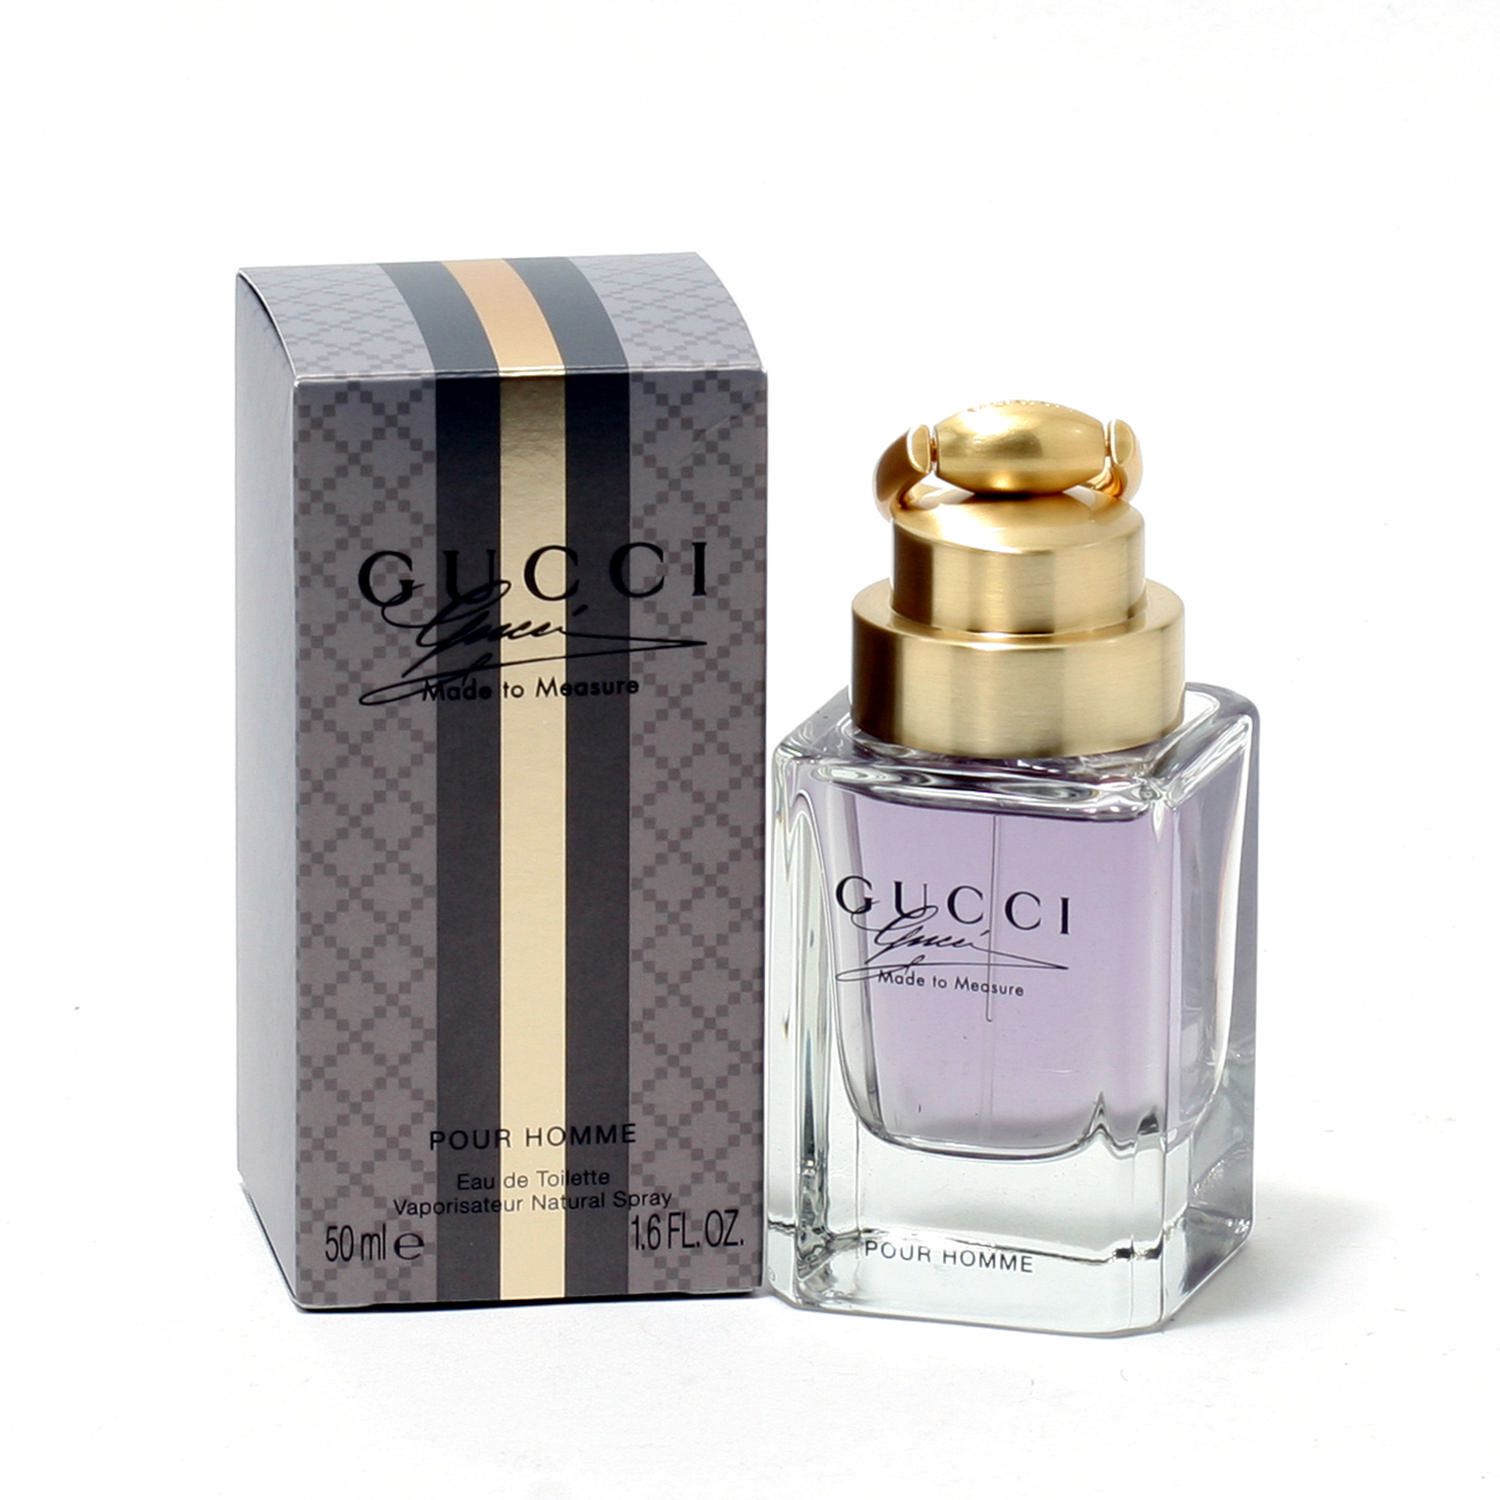 gucci made to measure price